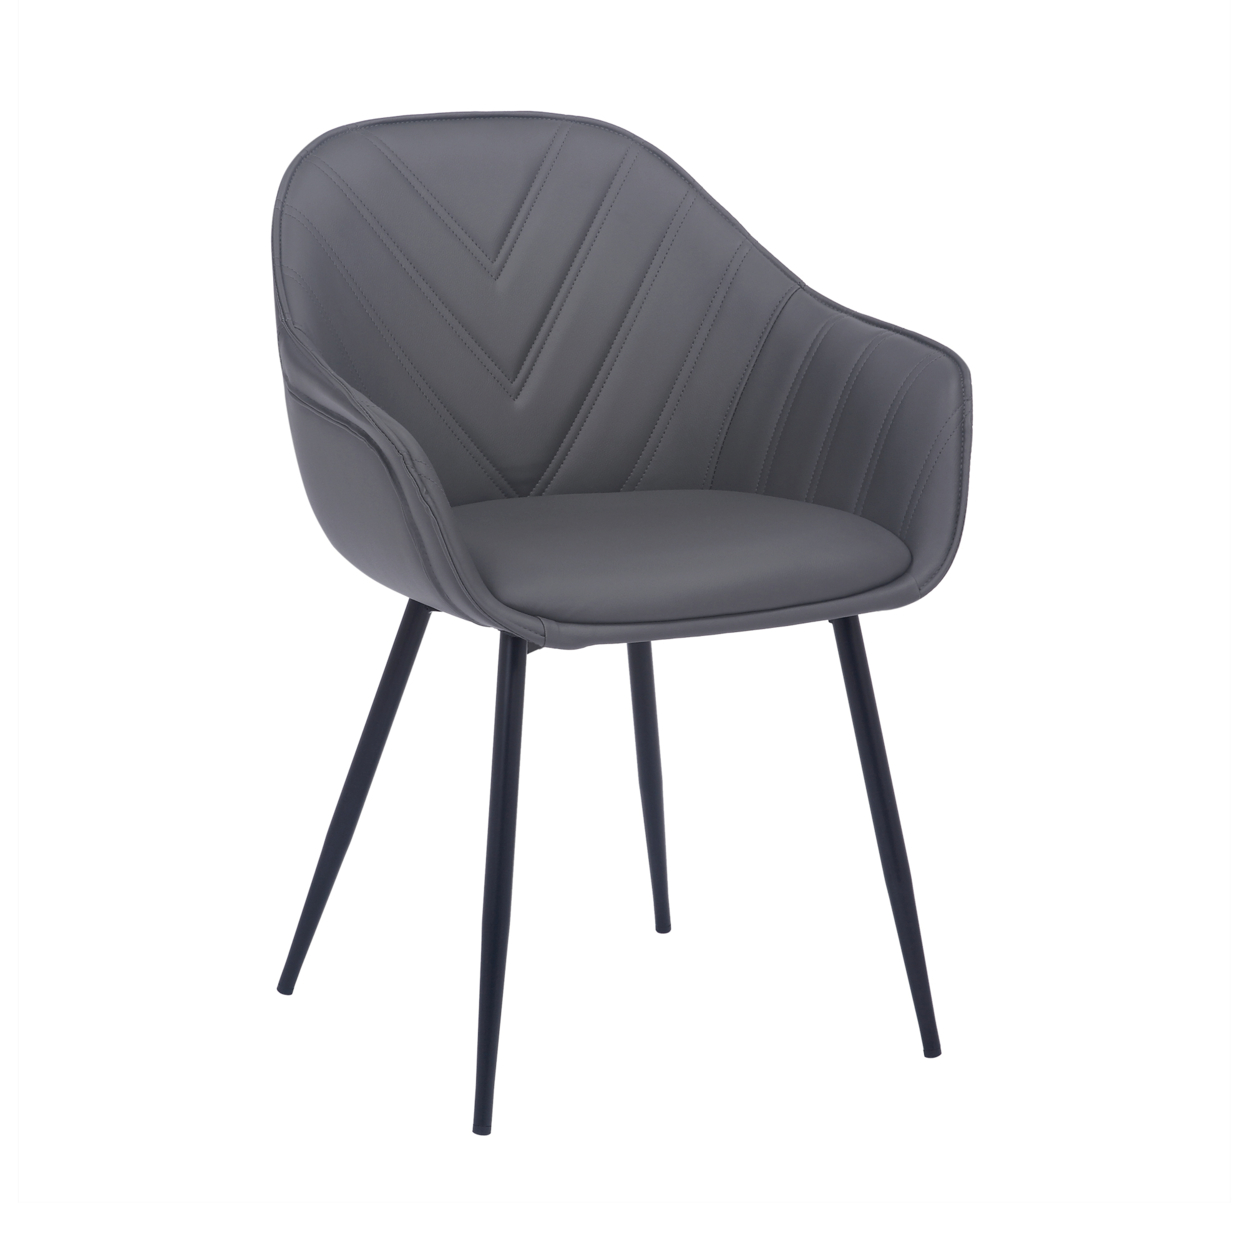 Leatherette Dining Chair With Stitched Chevron Pattern, Gray- Saltoro Sherpi